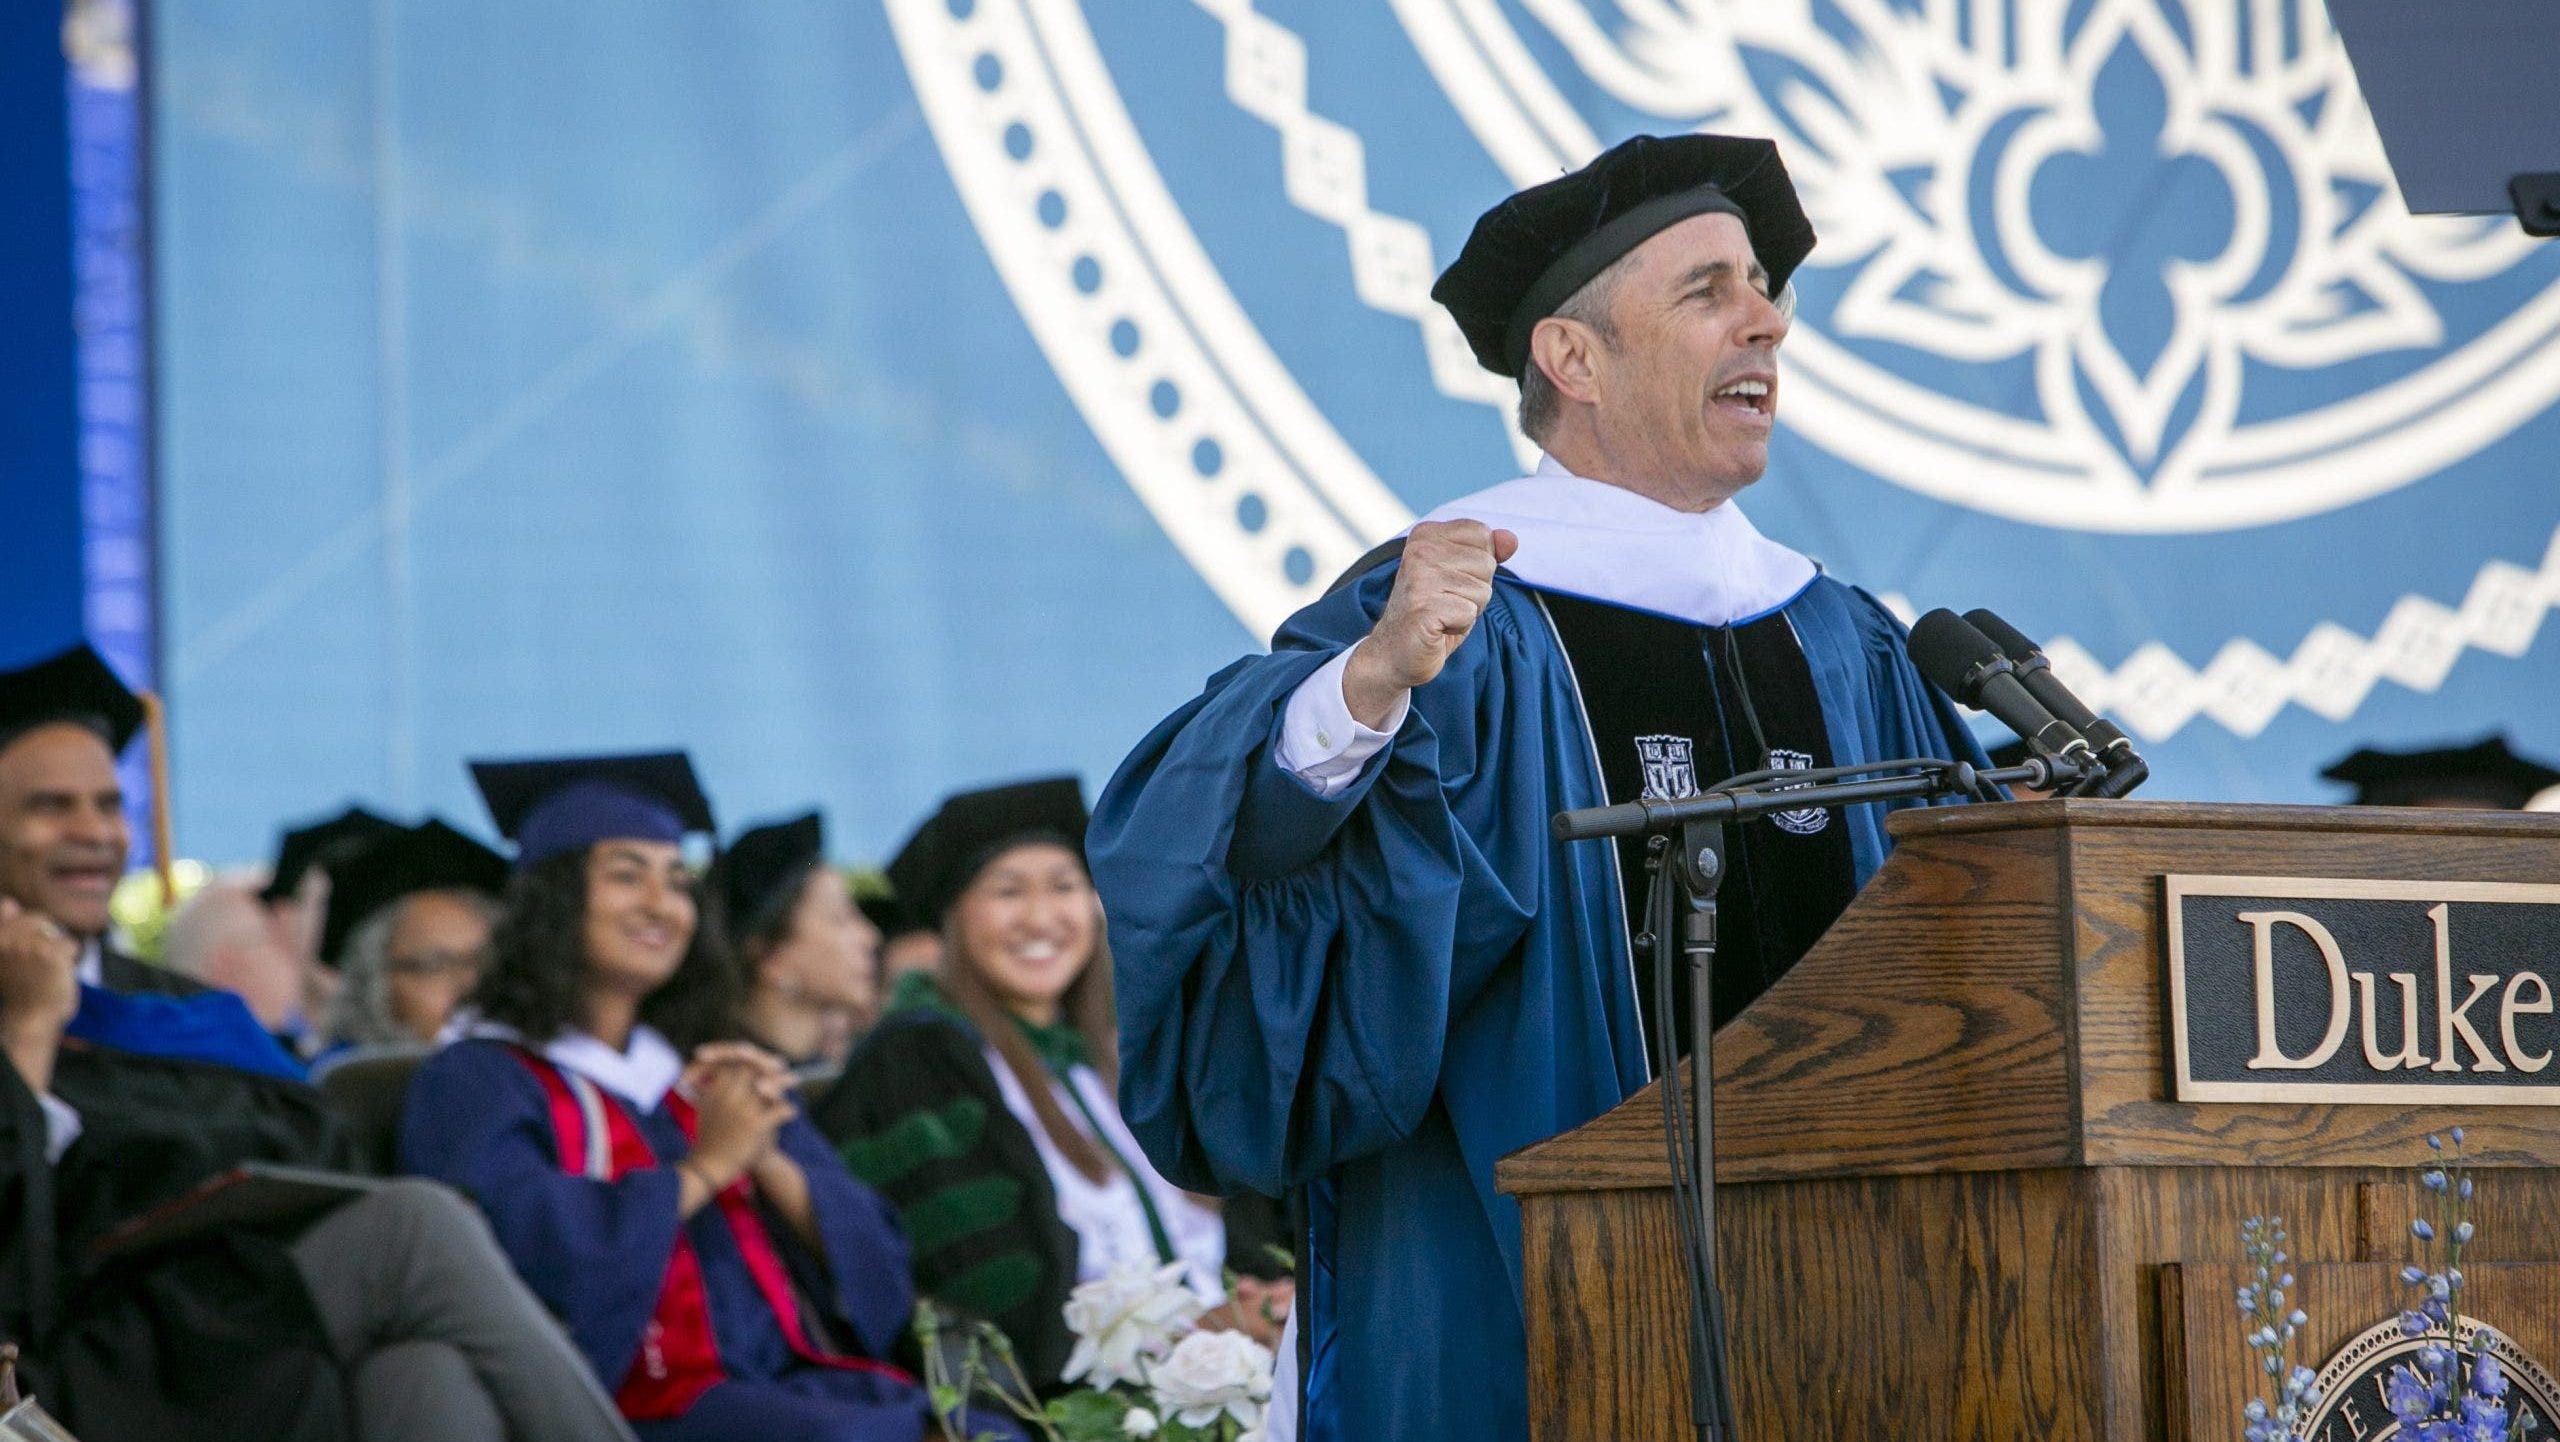 News :Jerry Seinfeld’s wife applauds Duke crowd who drowned out anti-Israel protesters during commencement speech